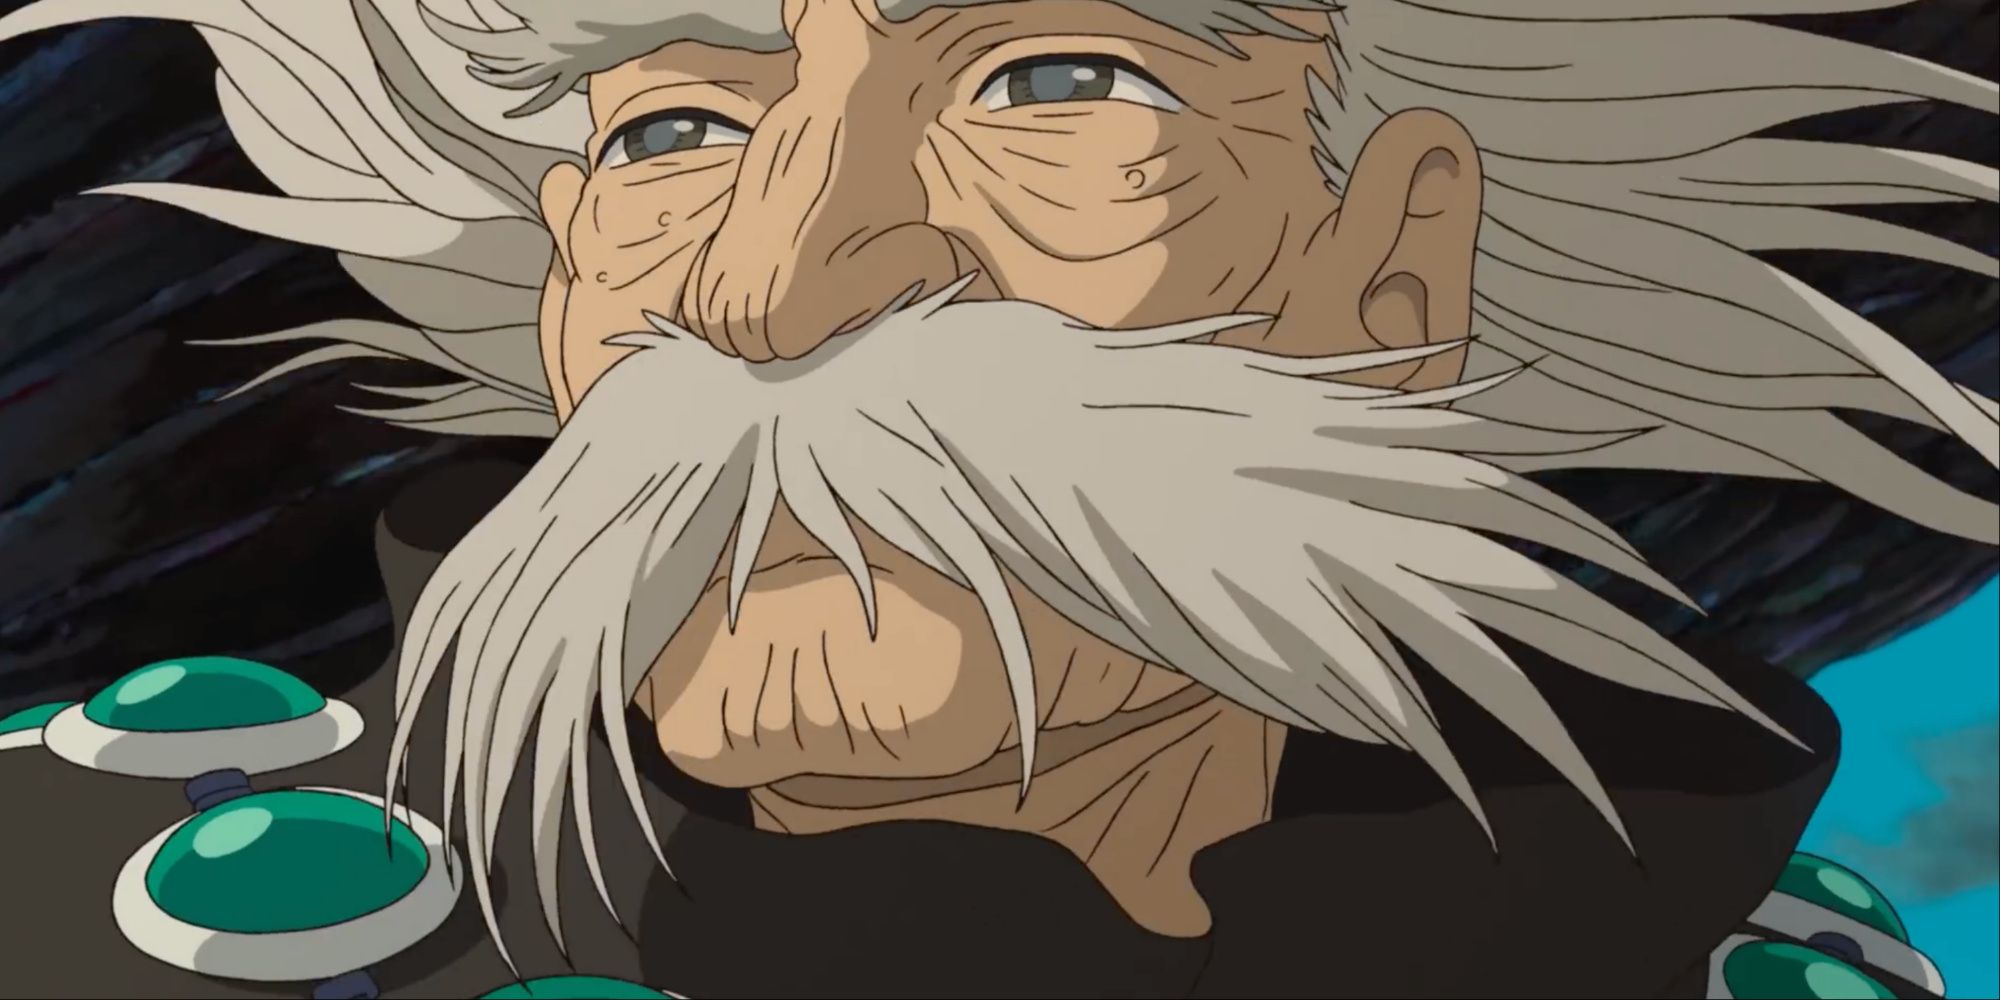 Grand Uncle in The Boy and the Heron